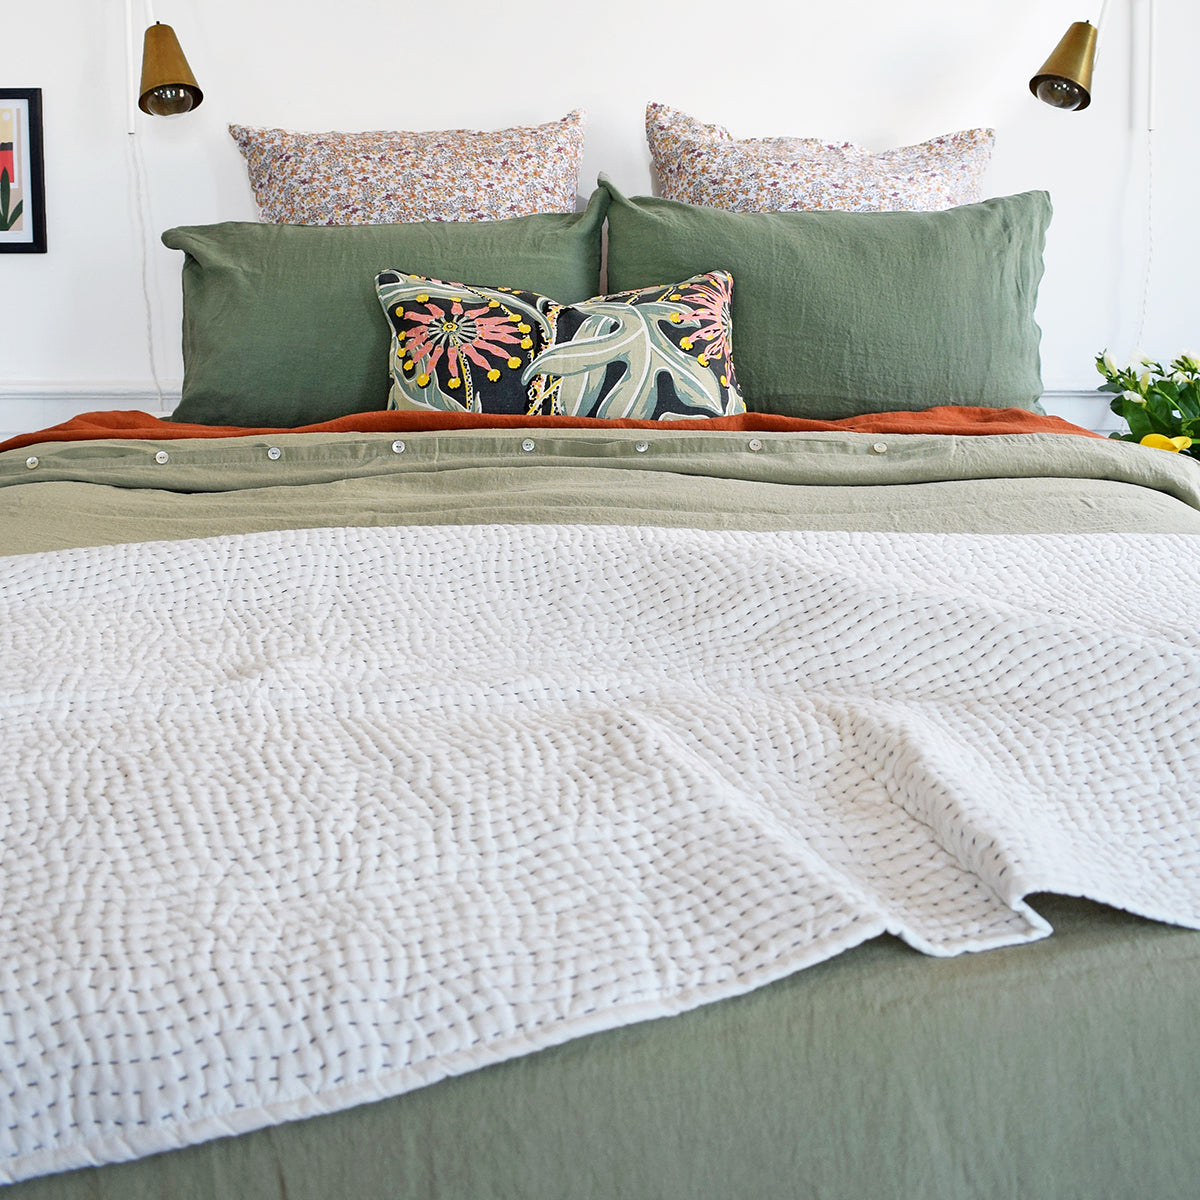 Linge Particulier Jade Green Standard Linen Pillowcase Sham with a fennel green linen duvet and green Utopia Goods pillow for a colorful linen bedding look in camo green - Collyer&#39;s Mansion